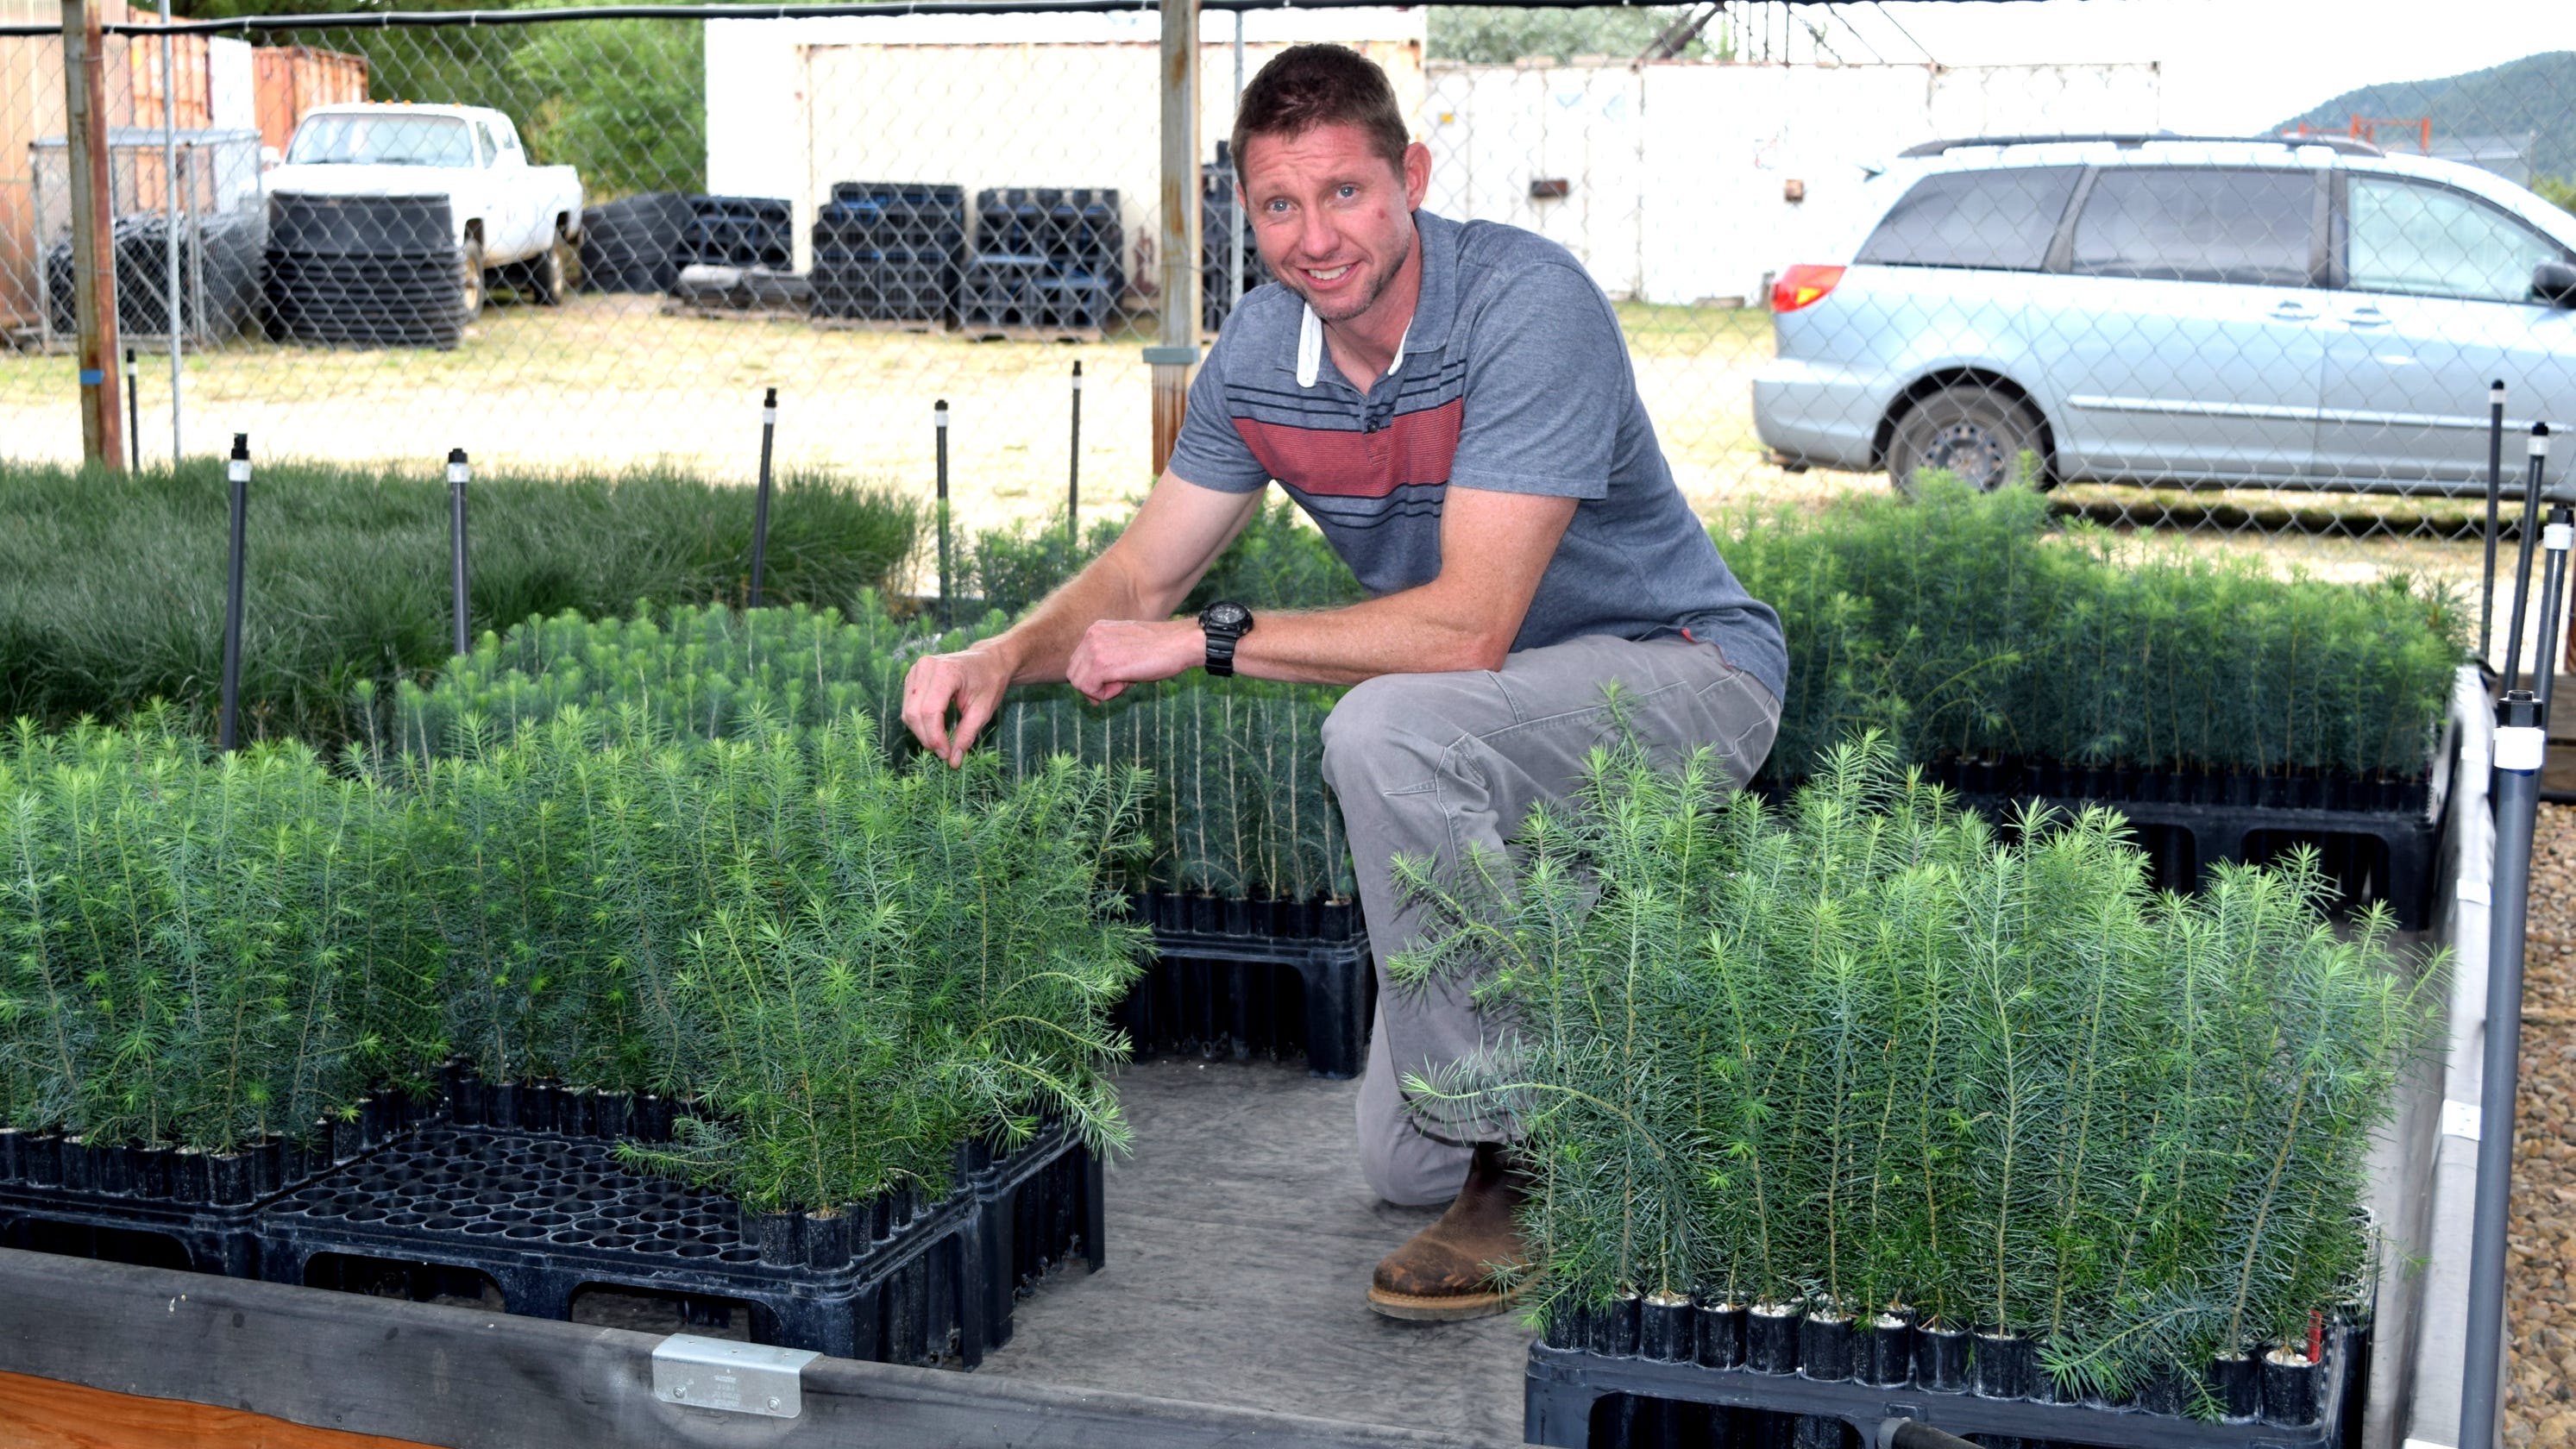 NMSU research proving ‘tough love’ helps tree seedlings survive harsh environments - Las Cruces Sun-News